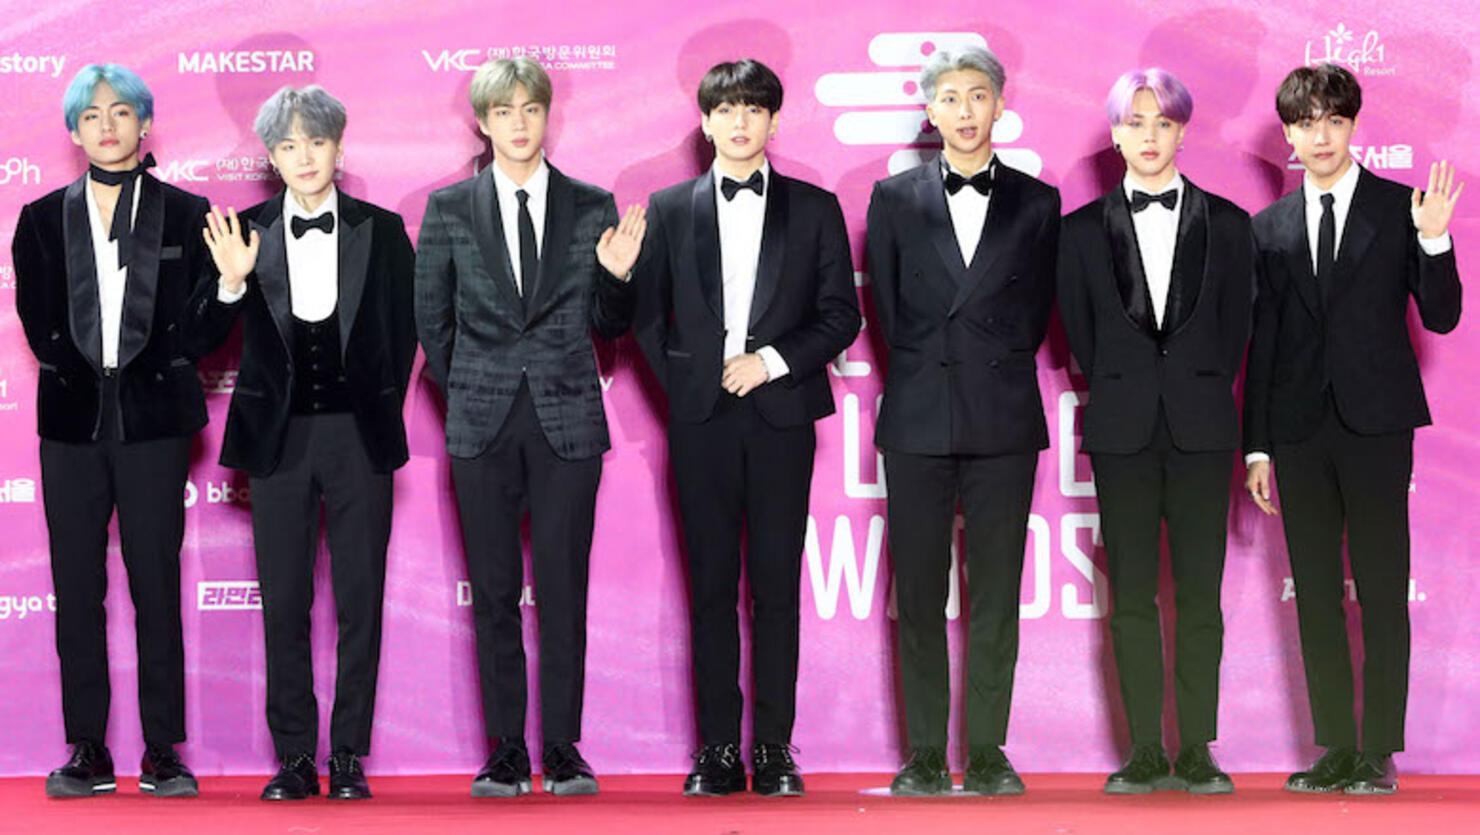 BTS at the 2019 Grammy Awards was the best part of the Grammys